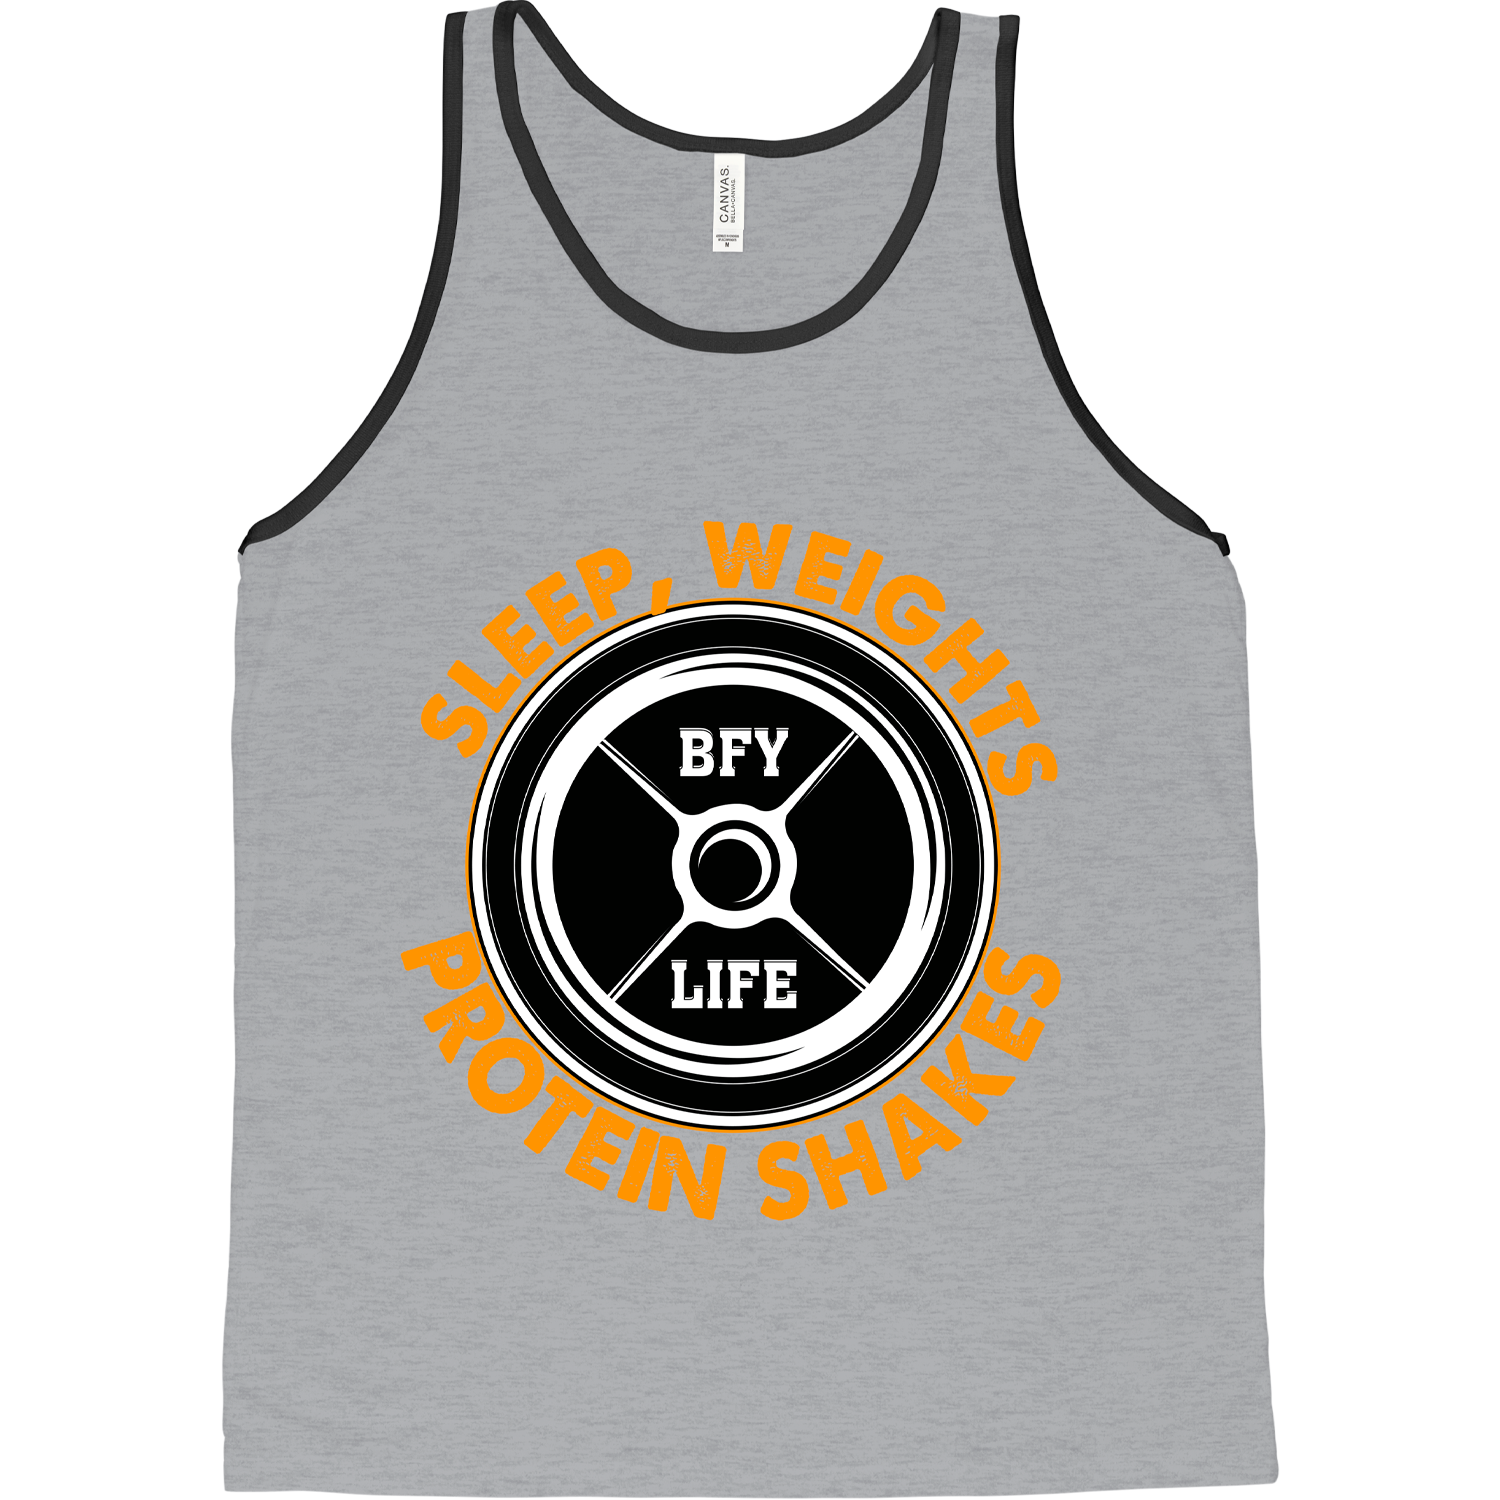 SWPS Sleep Weights and Protein Shakes Tank - Front - 1500x1500